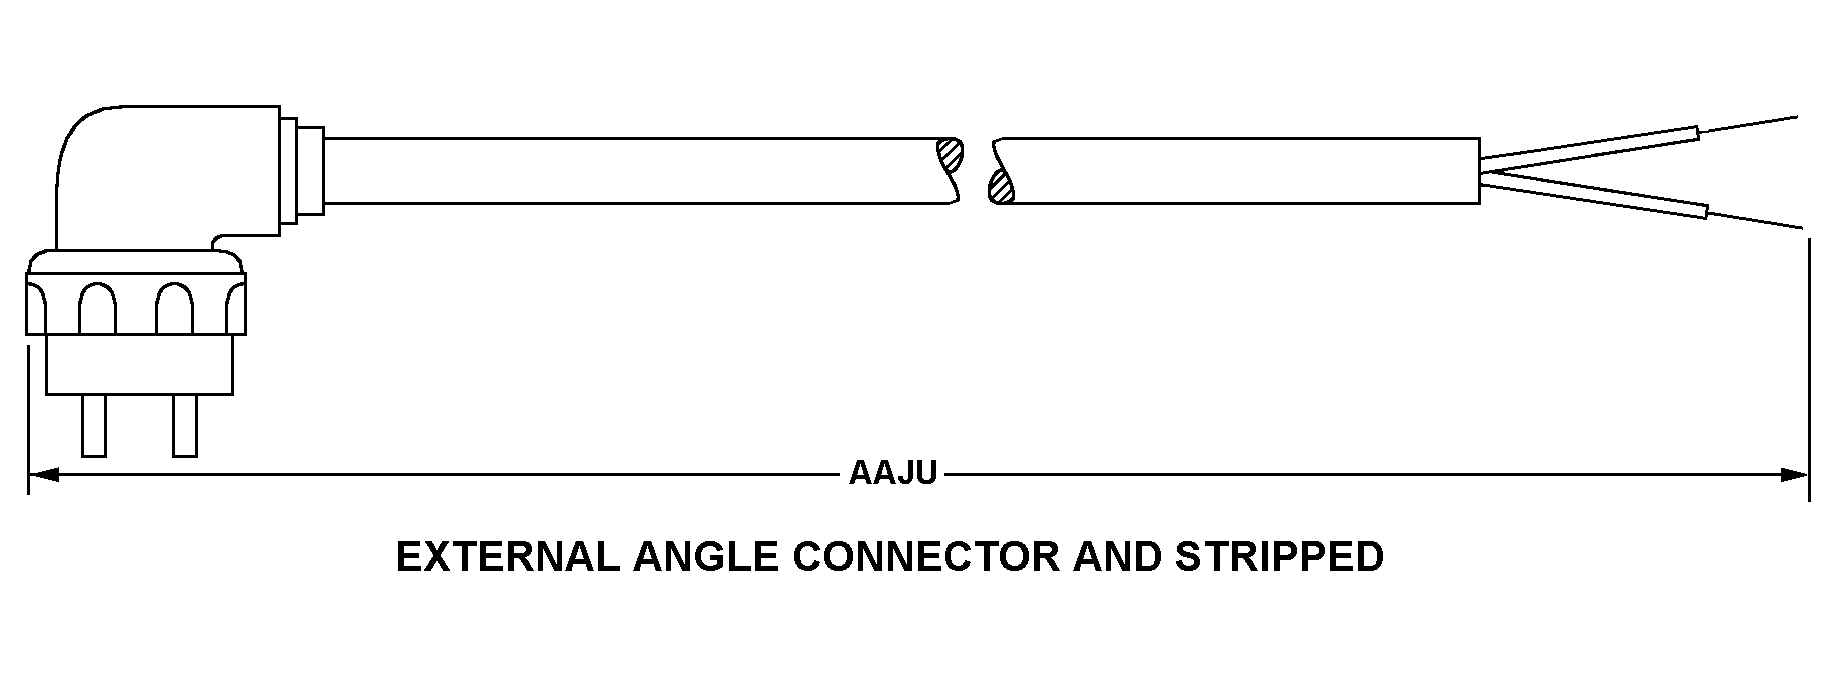 EXTERNAL ANGLE CONNECTOR AND STRIPPED style nsn 5995-01-190-2803